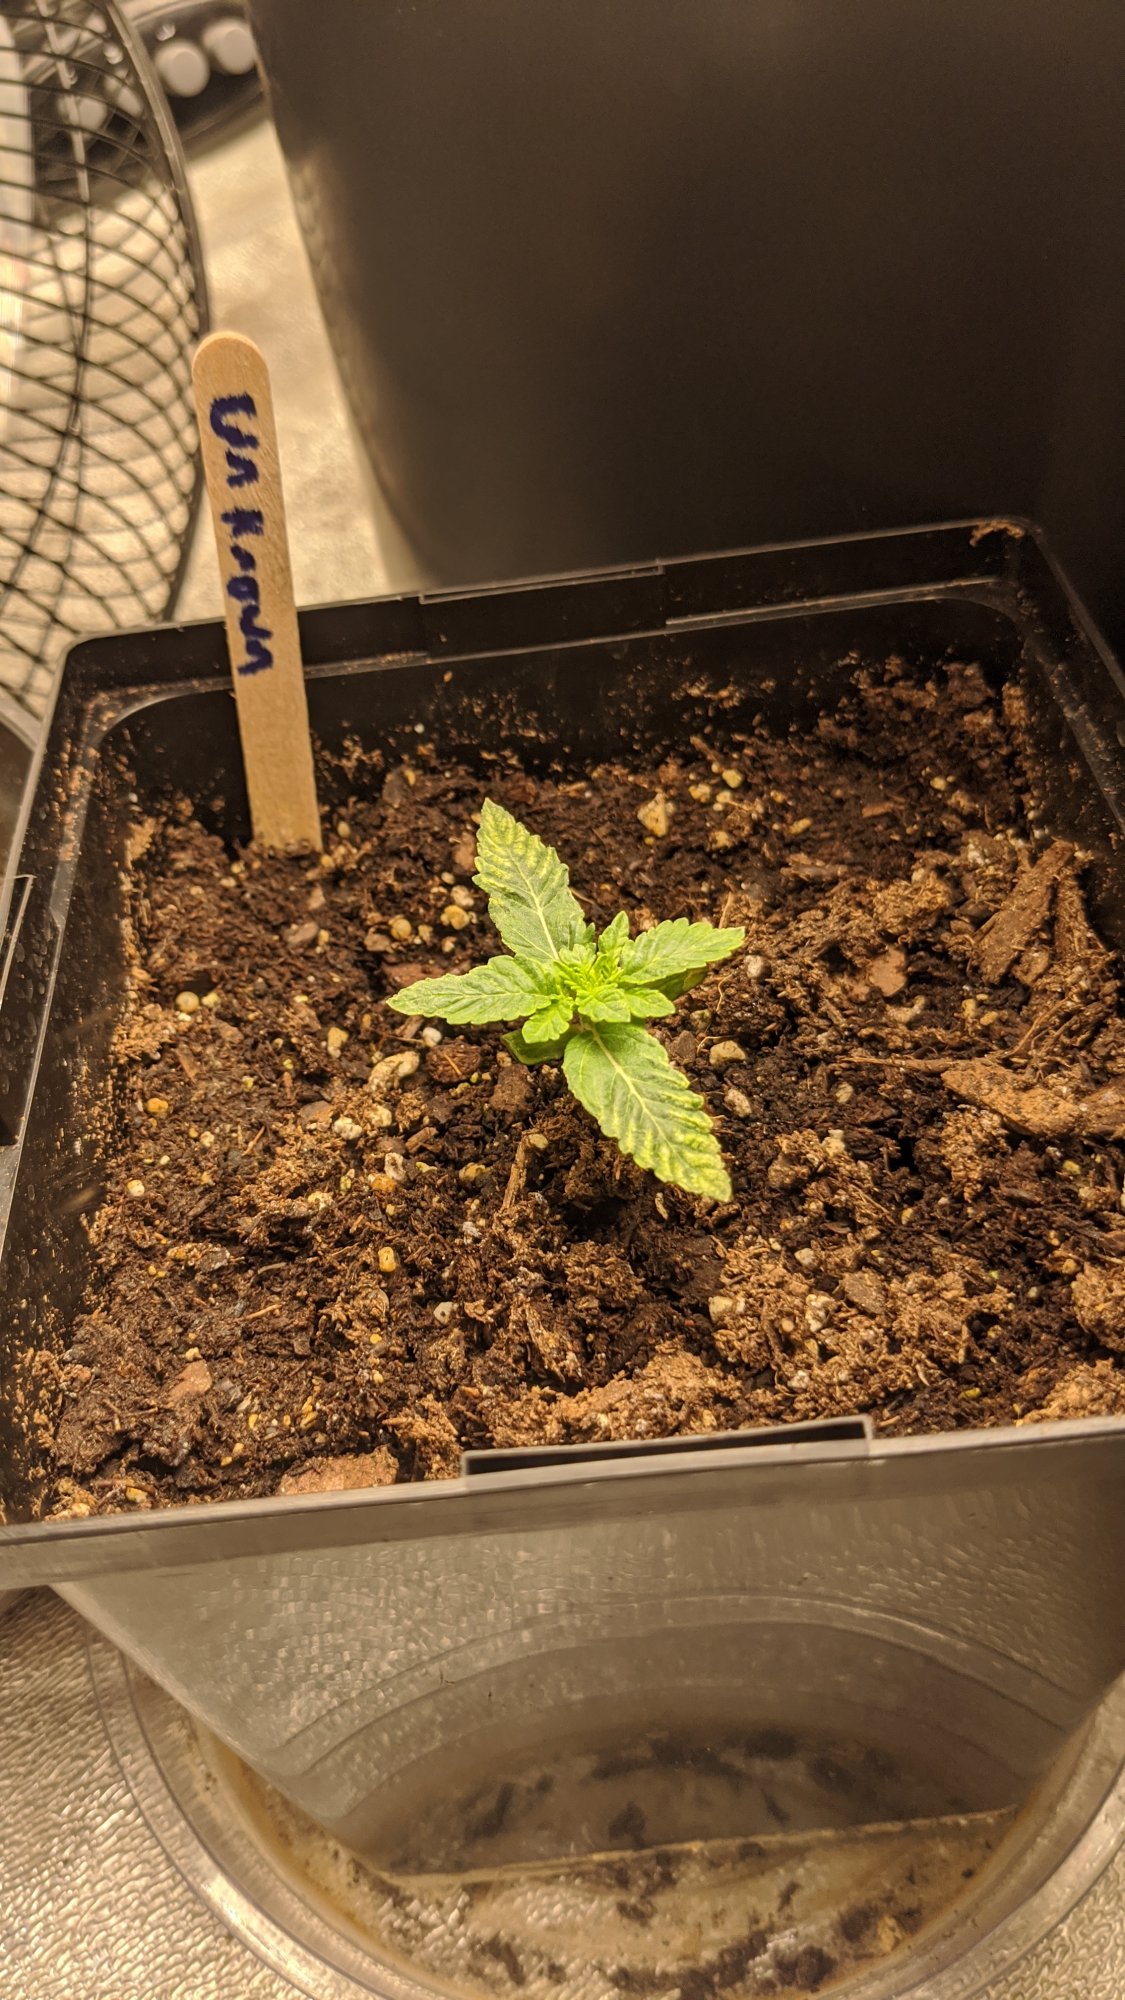 My current grow is having some issues 5